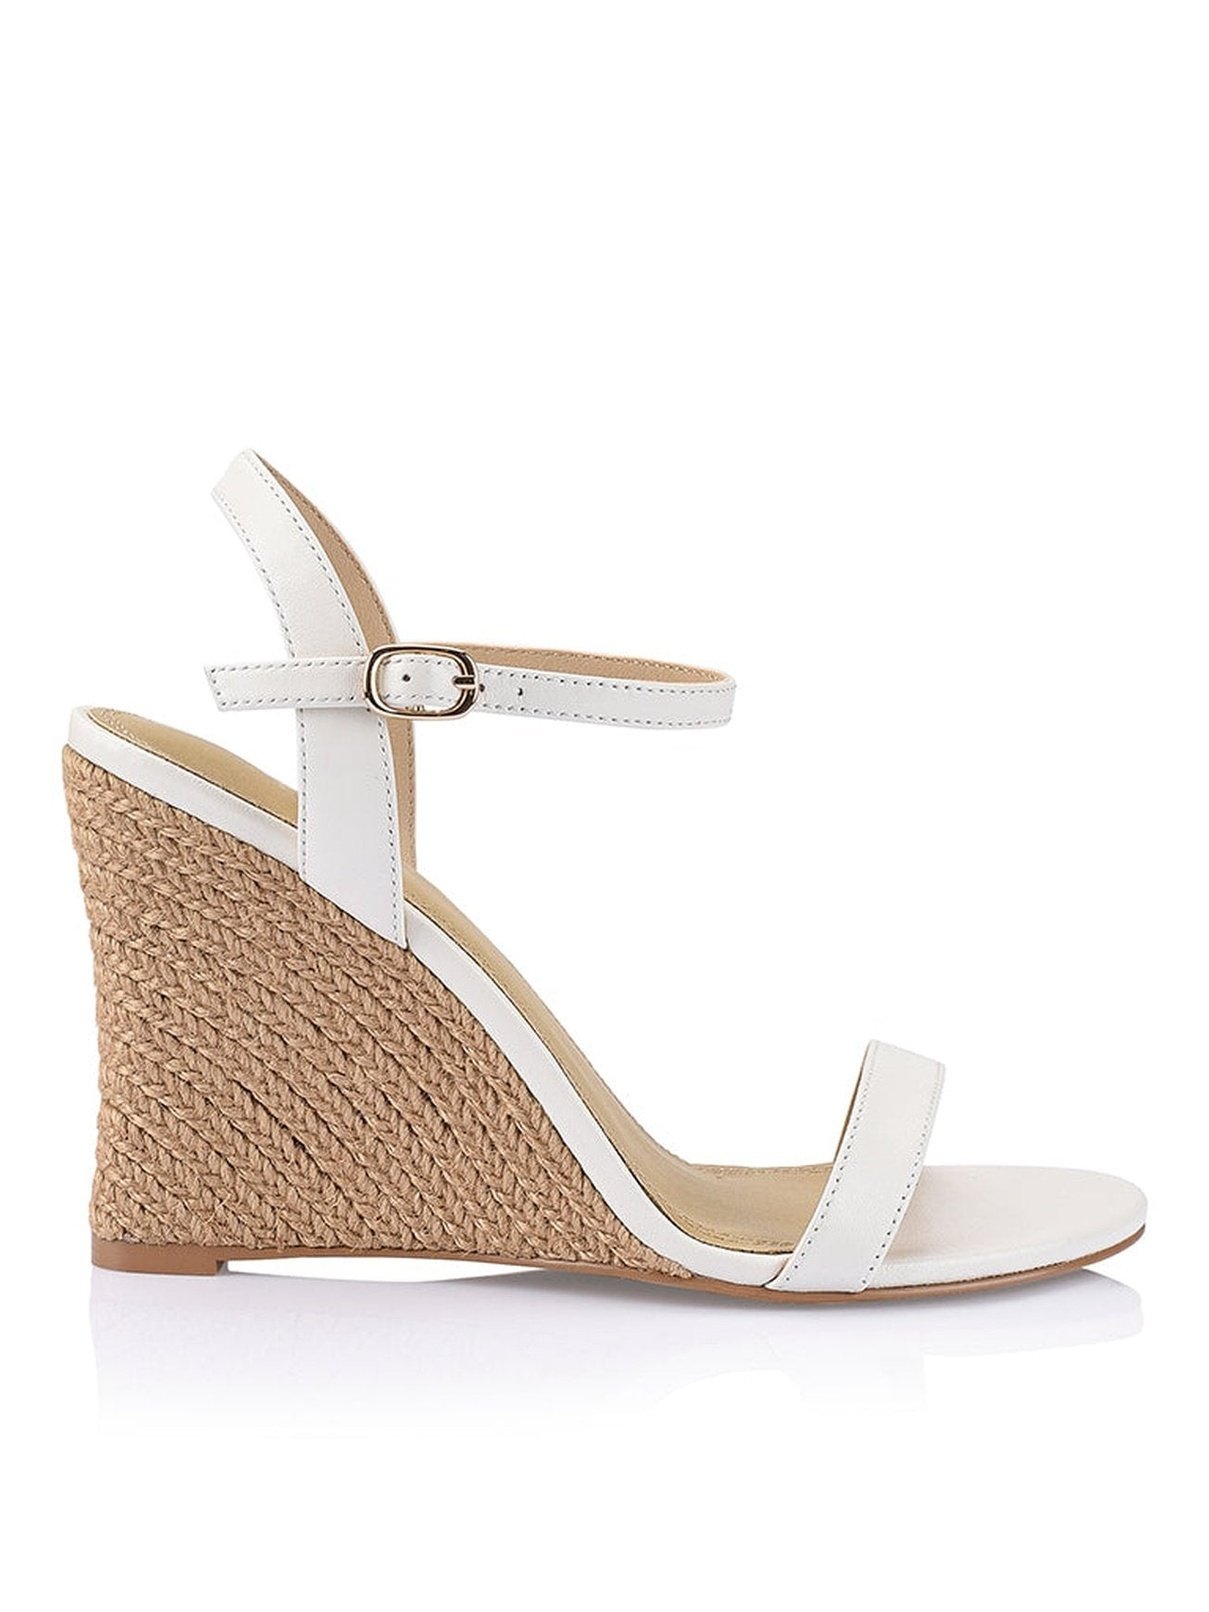 Baby Wedge Sandals - Chalk Leather